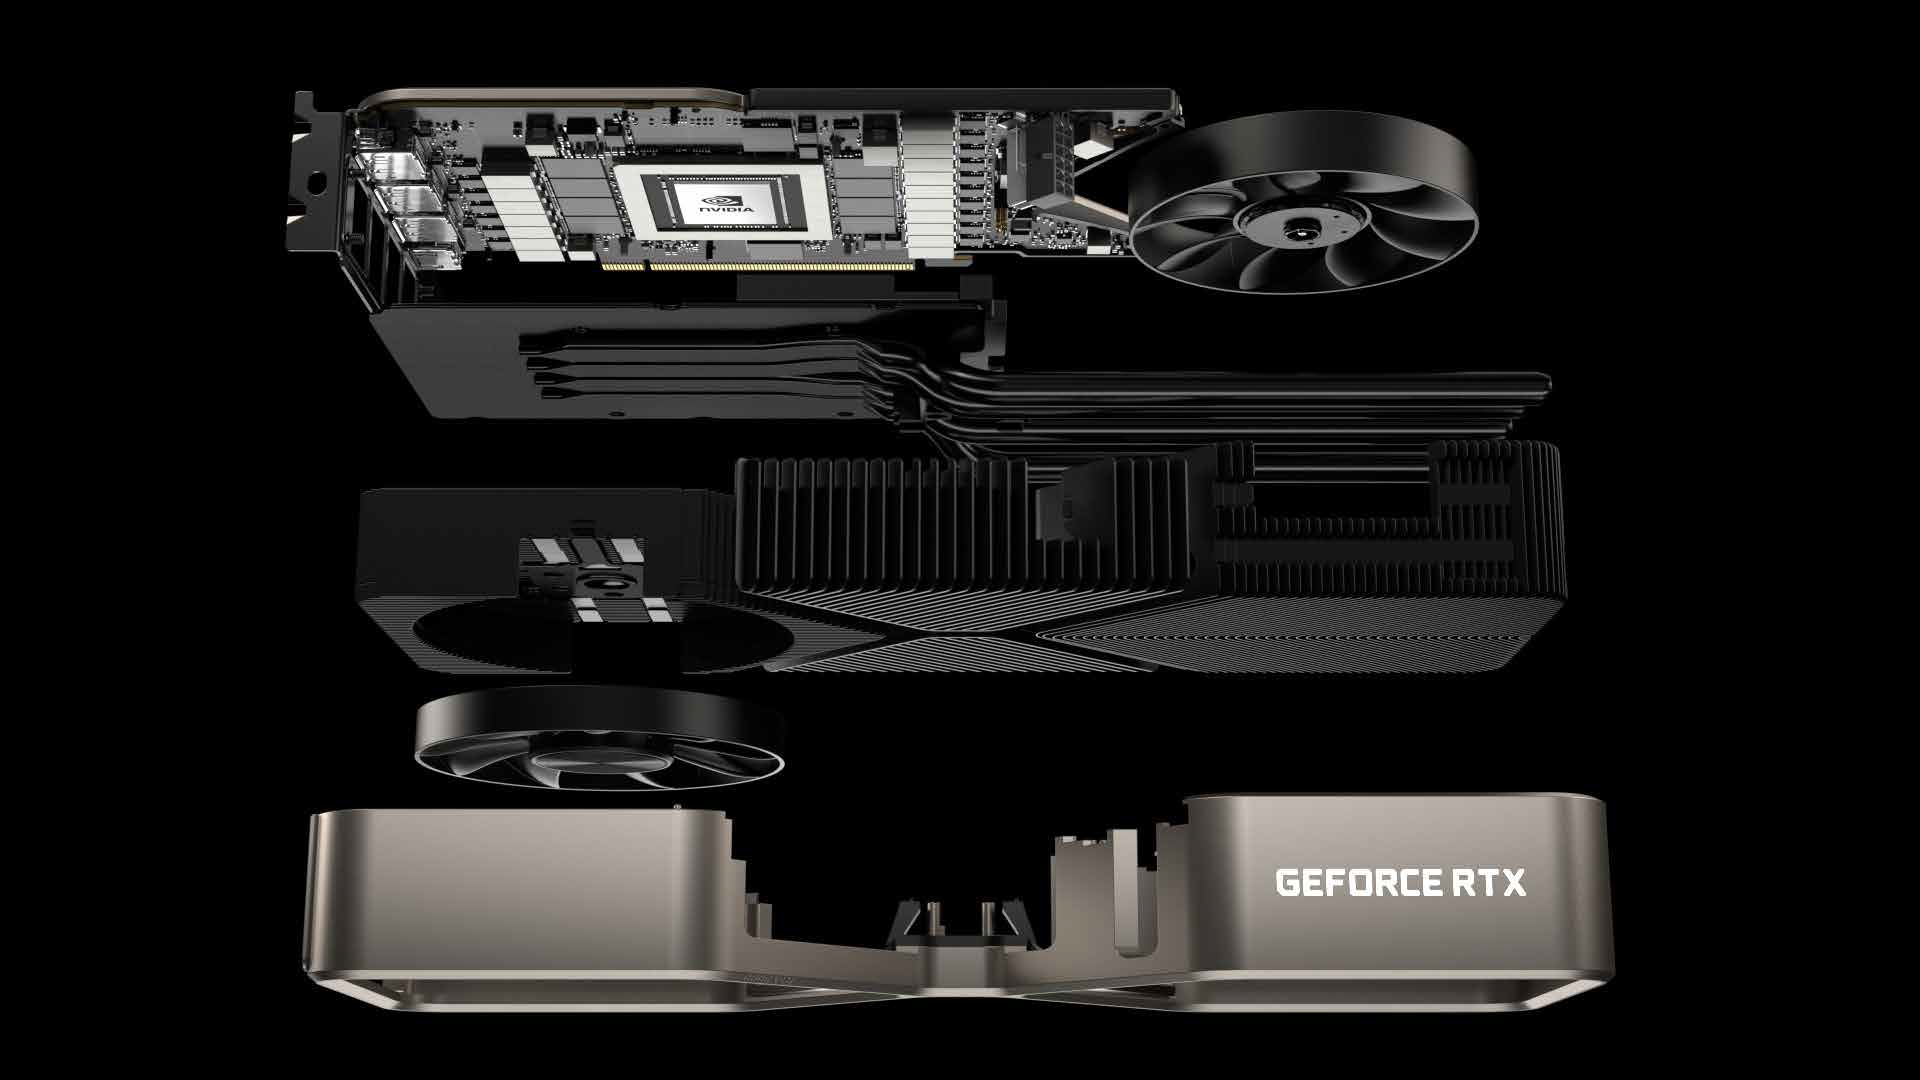 NVIDIA GeForce RTX 3080 Gaming Benchmarks Leak Out To 35% Faster Than RTX 2080 Ti